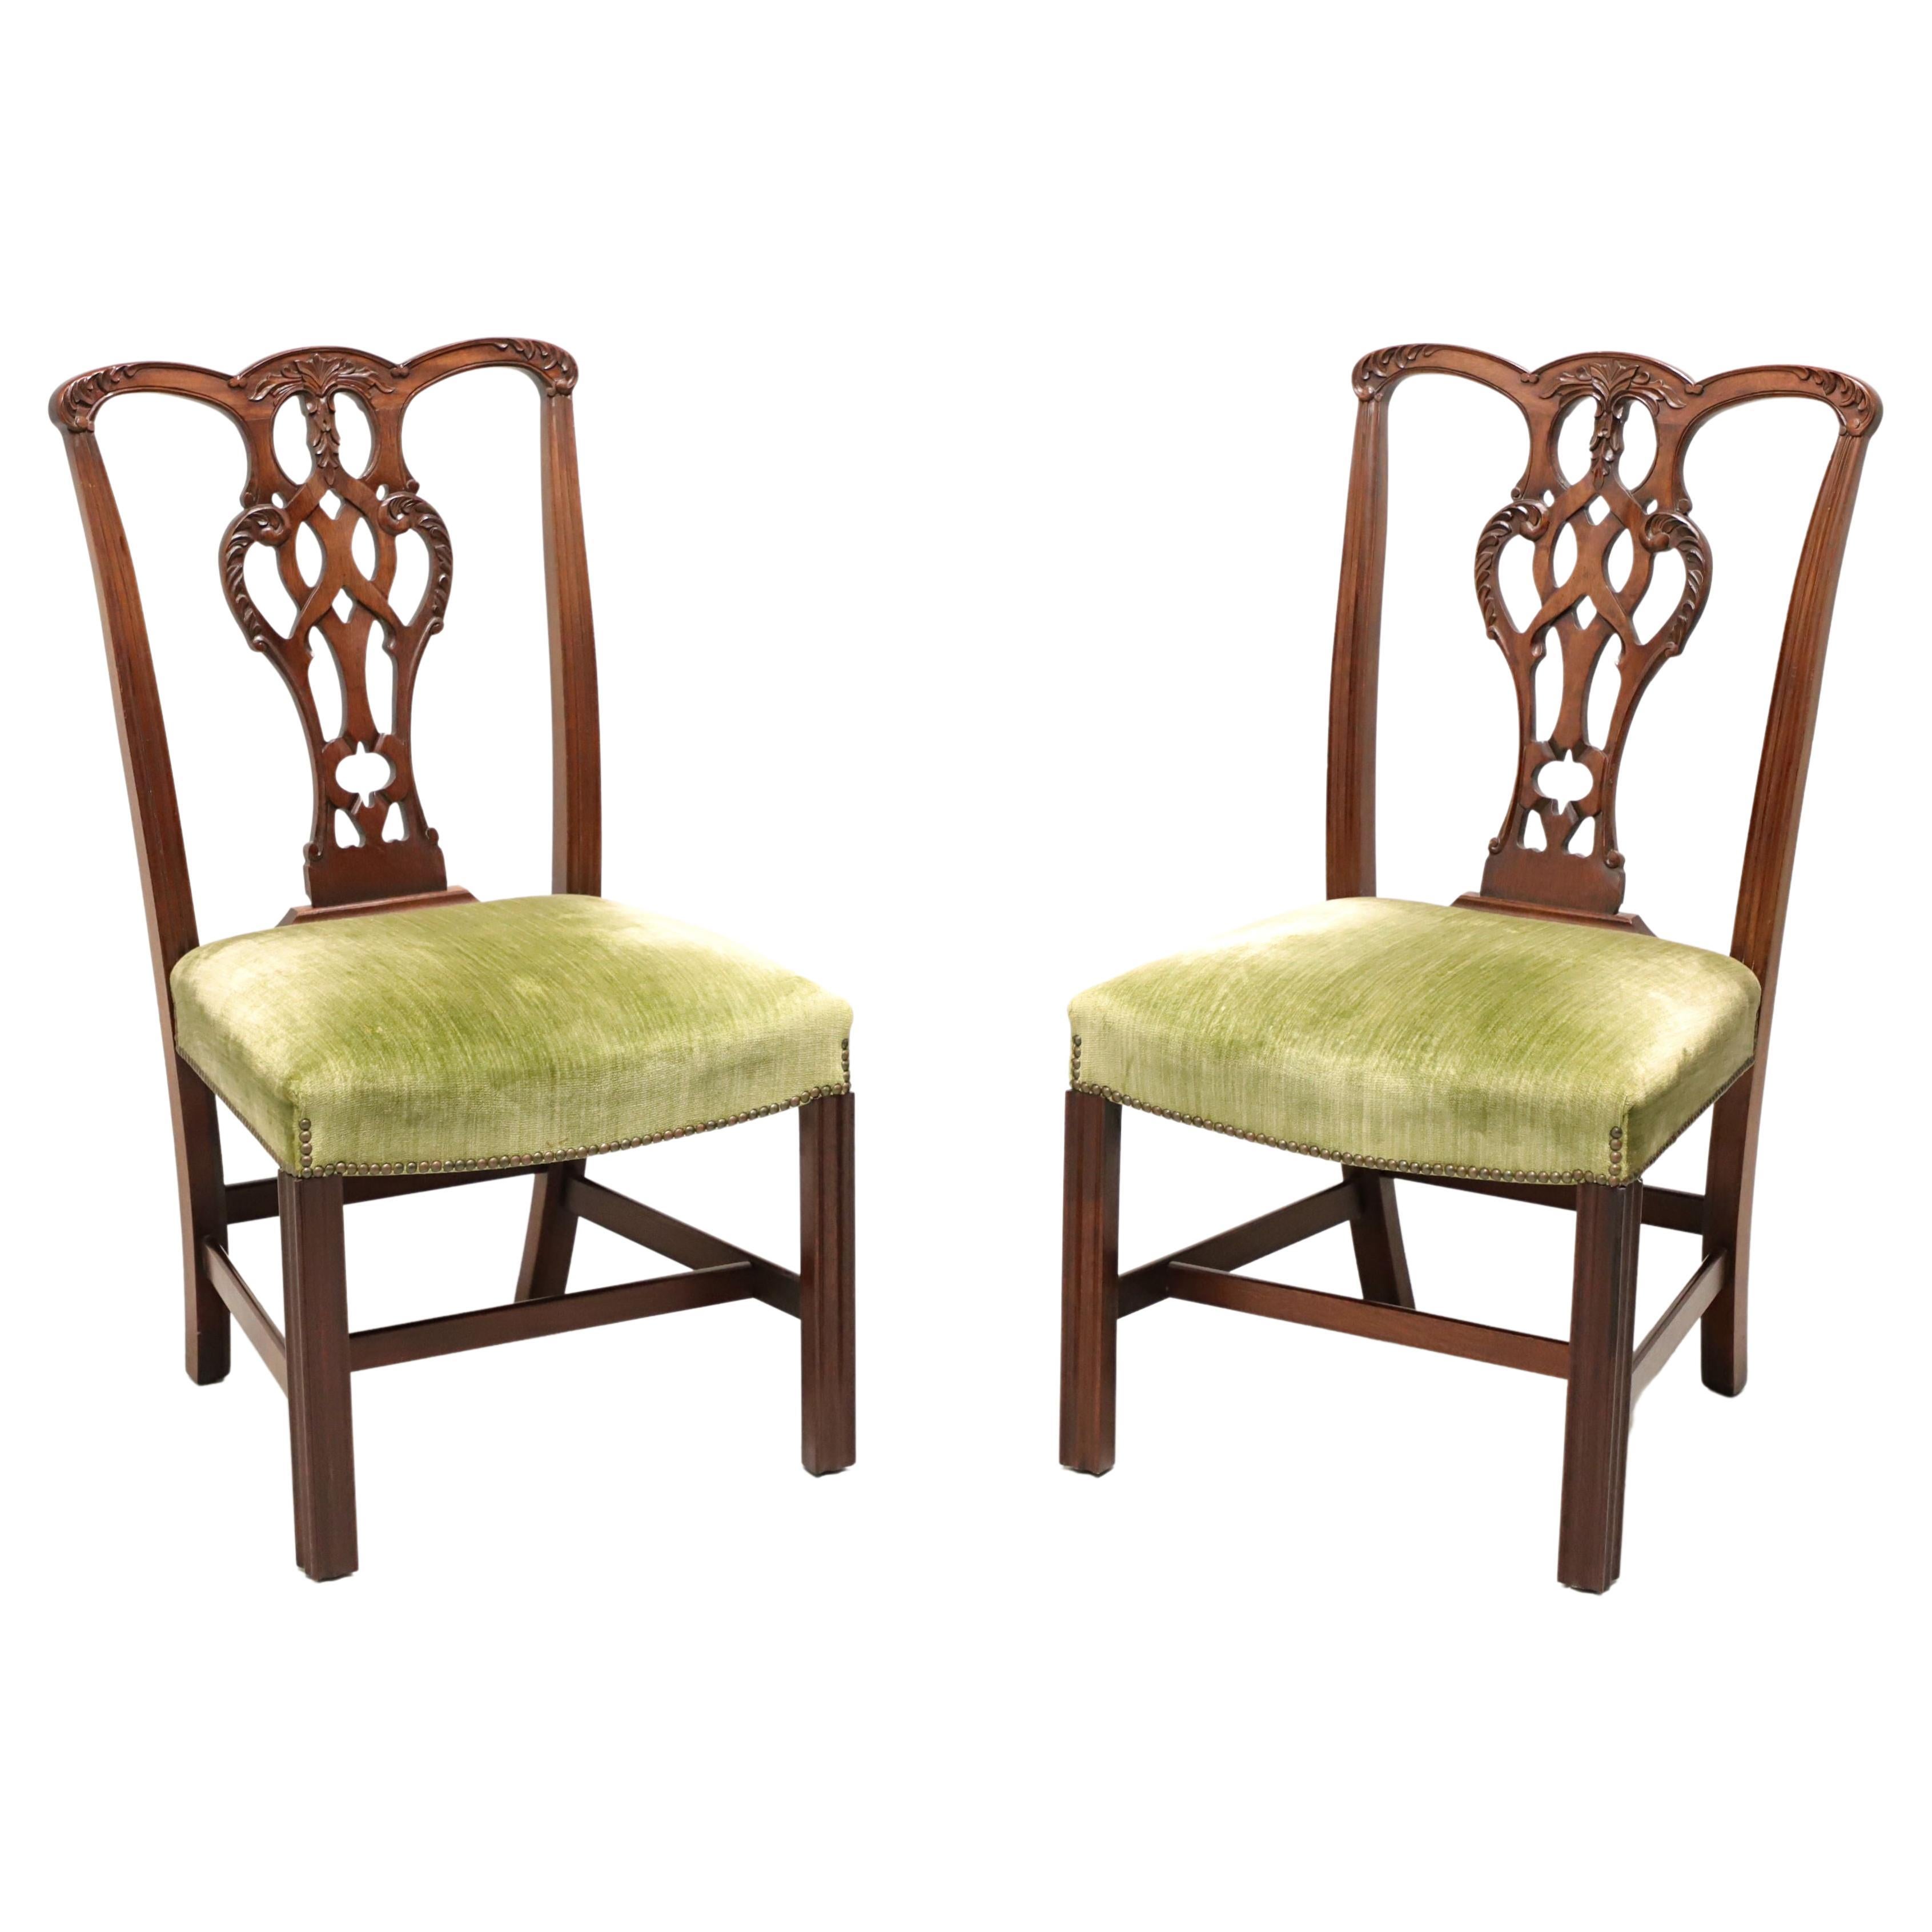 CRAFTIQUE Mahogany Chippendale Style Straight Leg Dining Side Chairs - Pair C